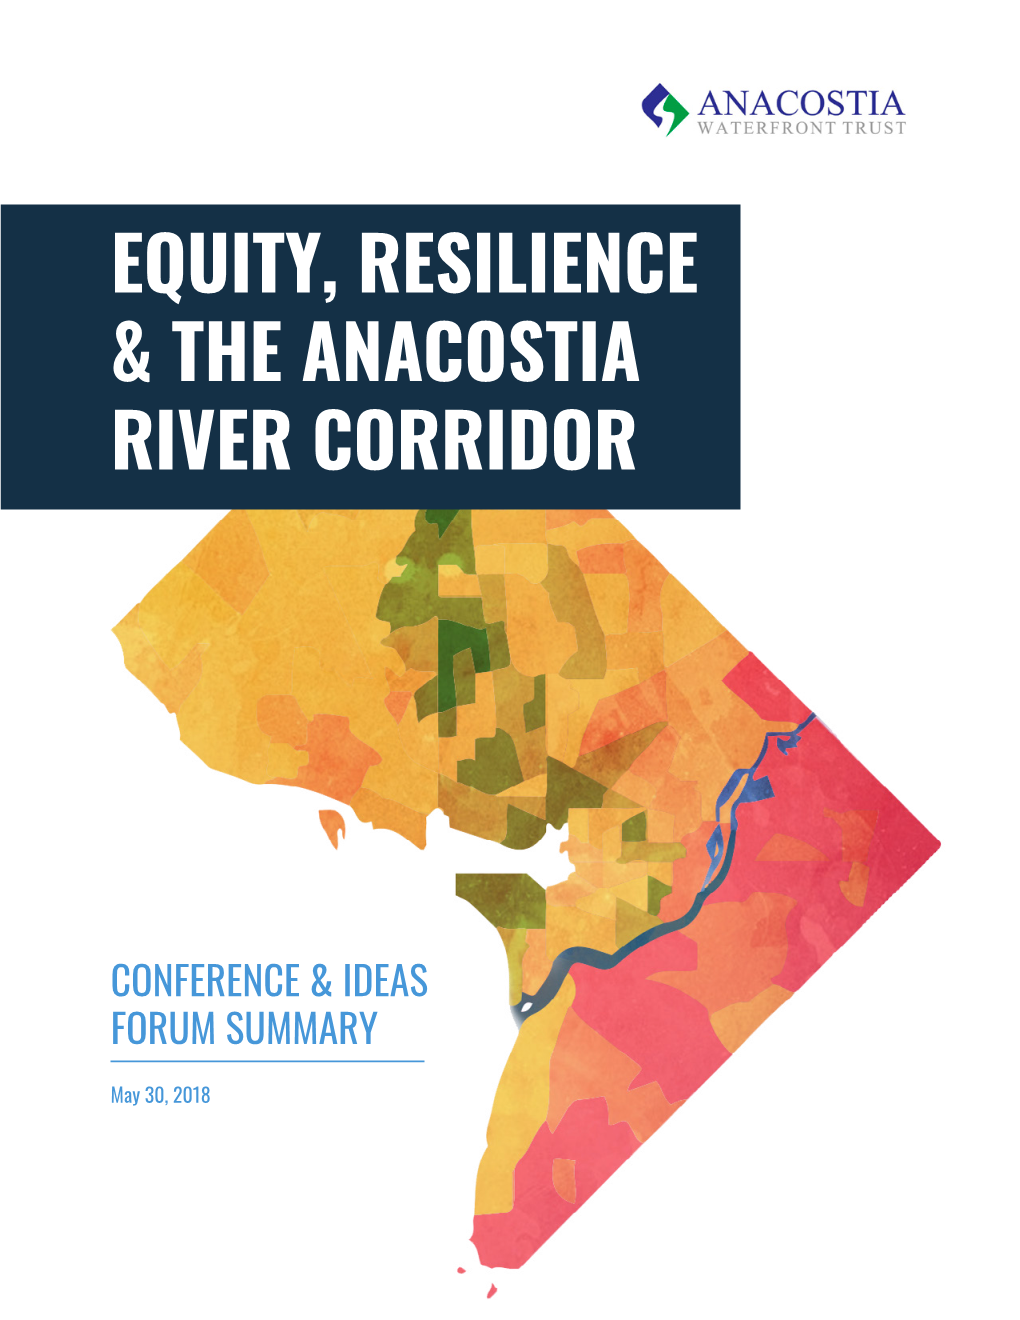 Equity, Resilience & the Anacostia River Corridor